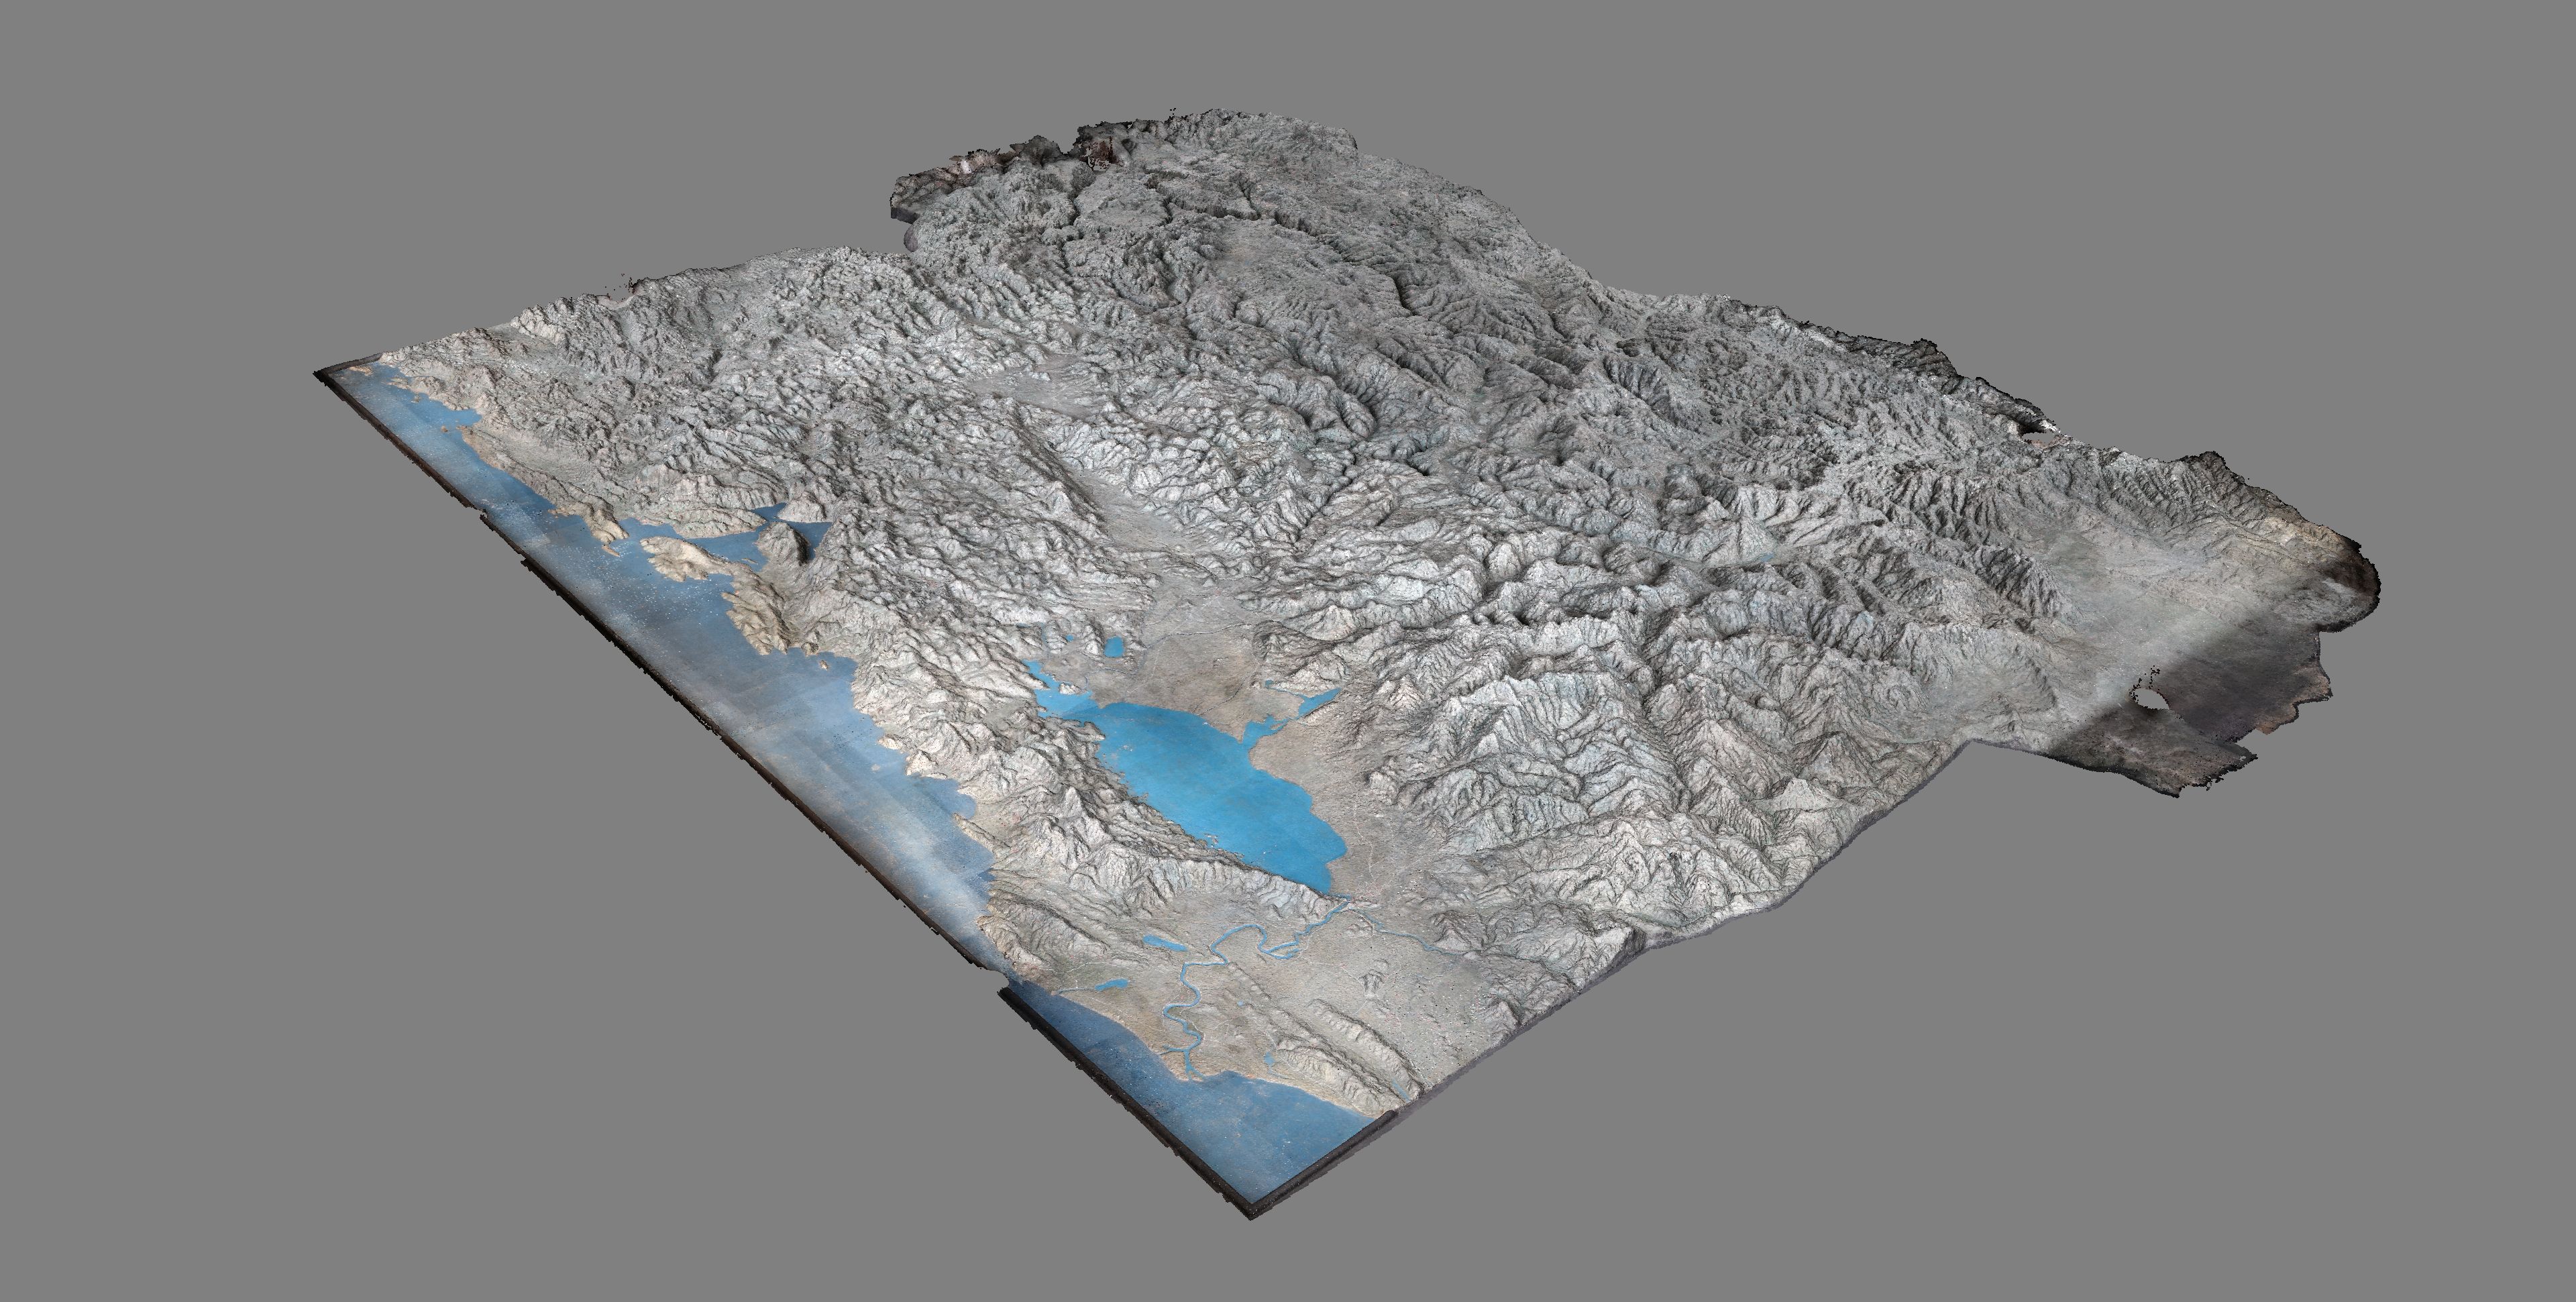 The 3D model of the relief map of Montenegro